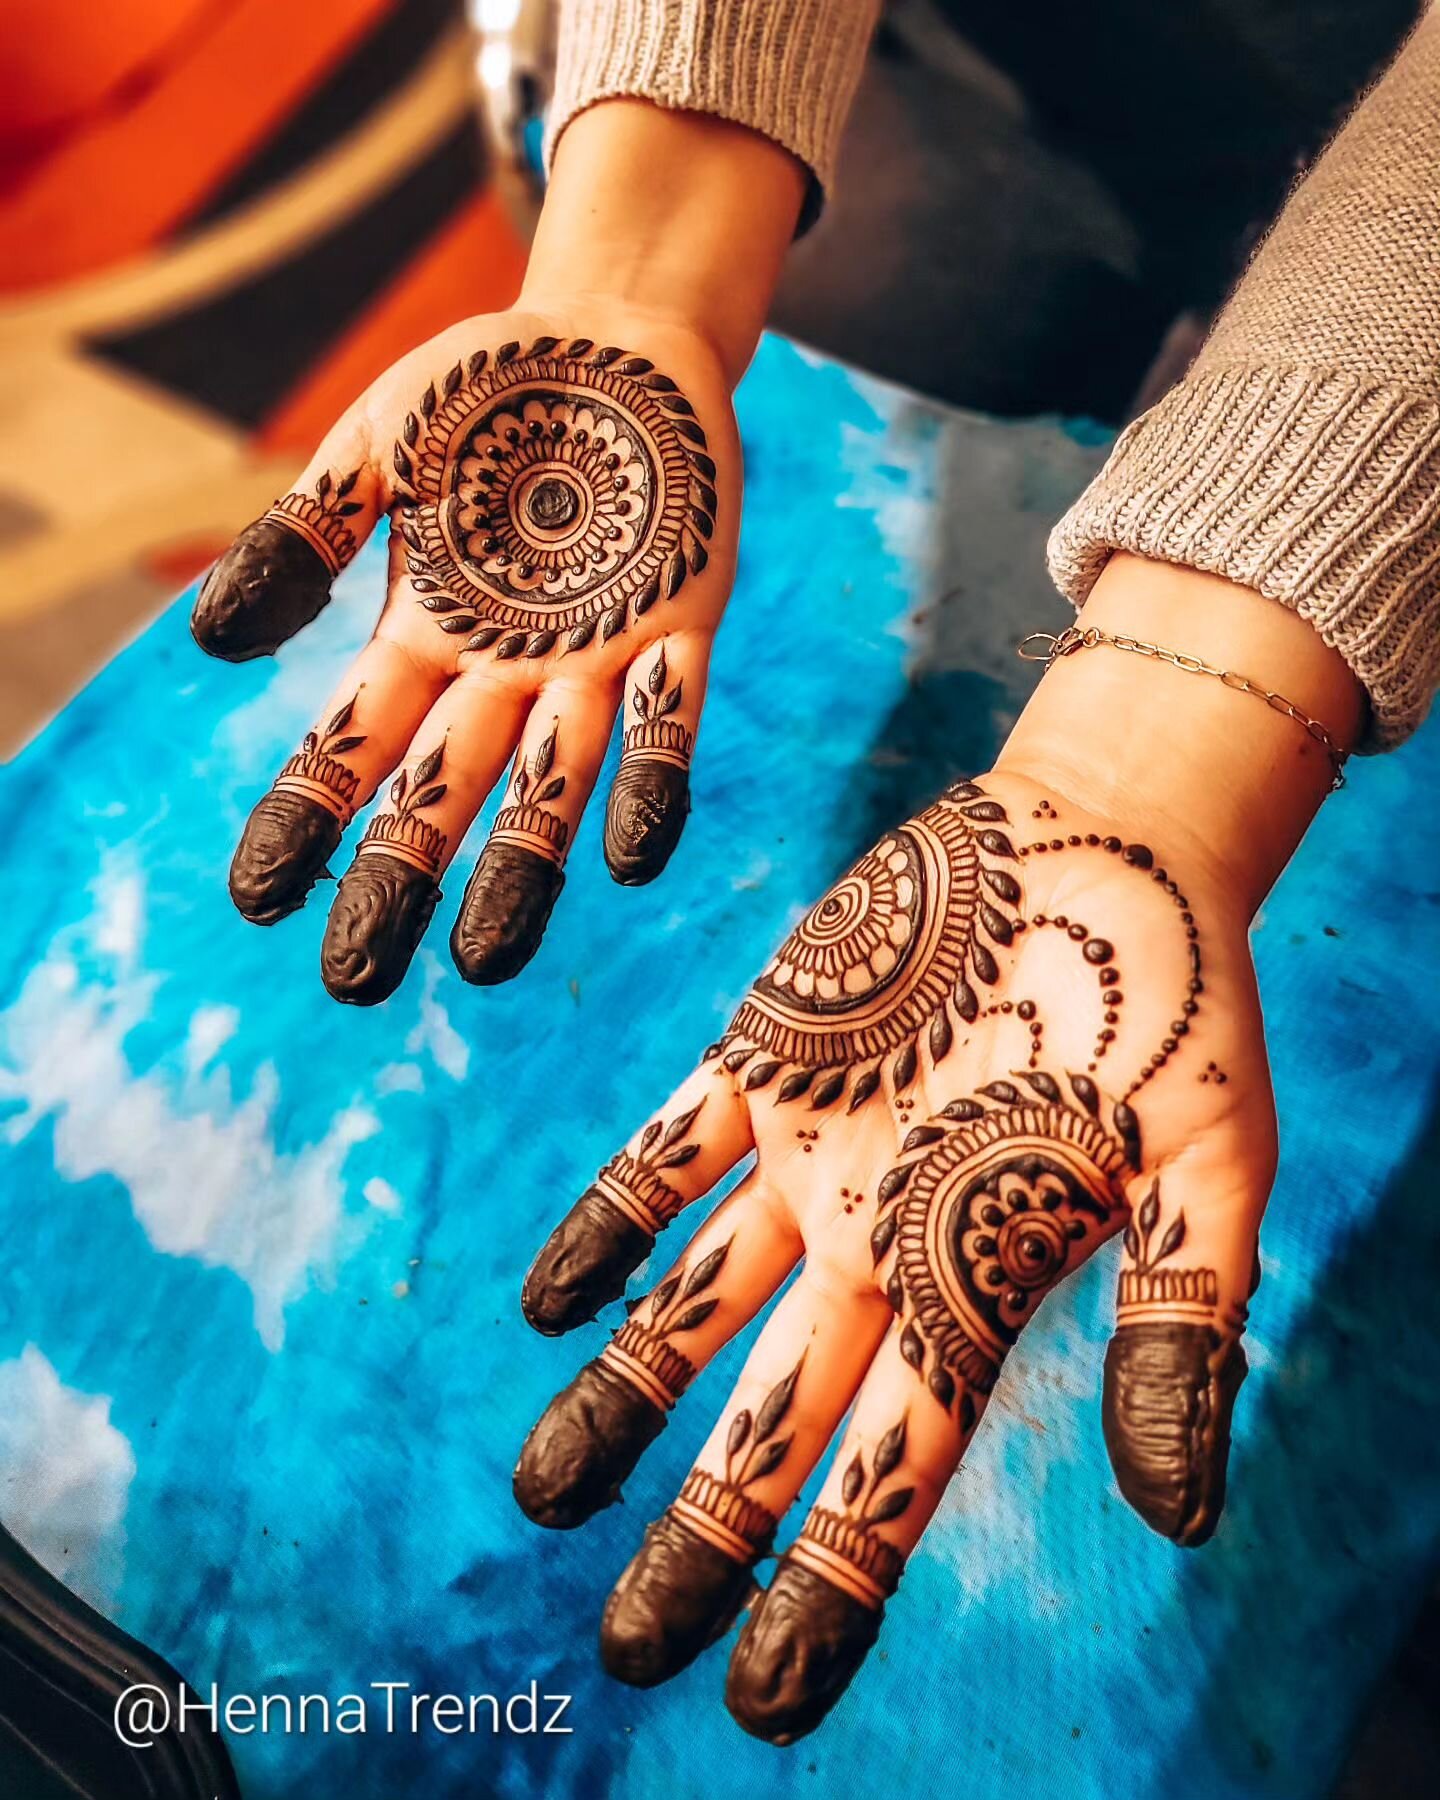 Simple palms for Aurora🥰✔️👍

FOLLOW @hennatrendz
YOUTUBE: HennaTrendz

💖💖Weekends are the best time to place your orders for fresh henna cones... I mix fresh batches every weekend to ship out on Monday!! visit link in bio and go to SHOP page for 